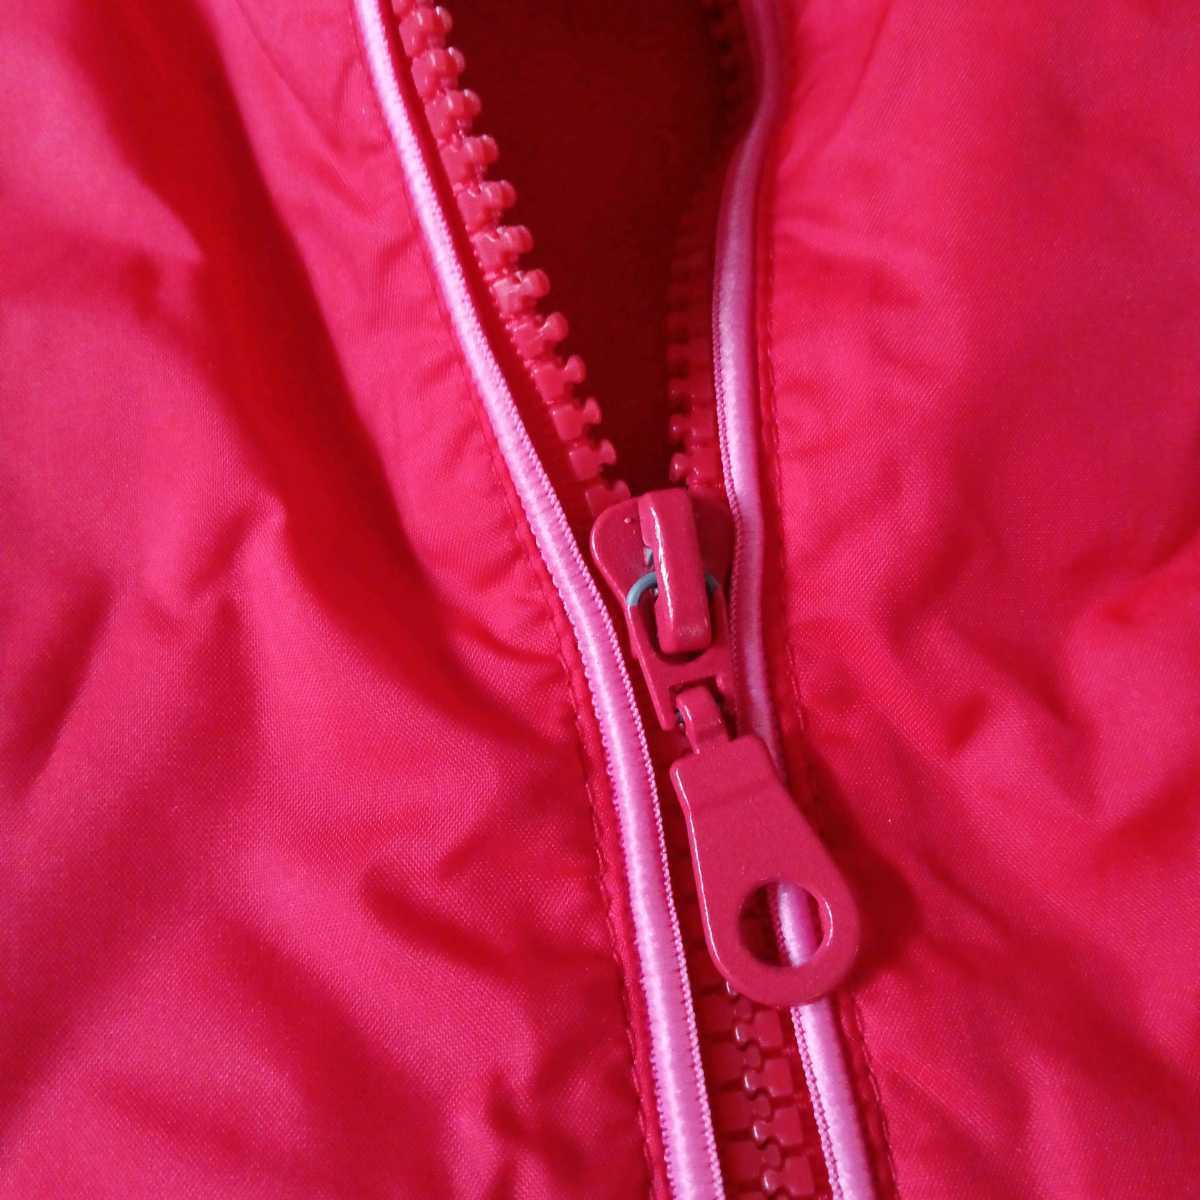 CUBIC MEASURE blouson parka window Bray car 120 size red color girl child clothes Kids Junior with a hood .